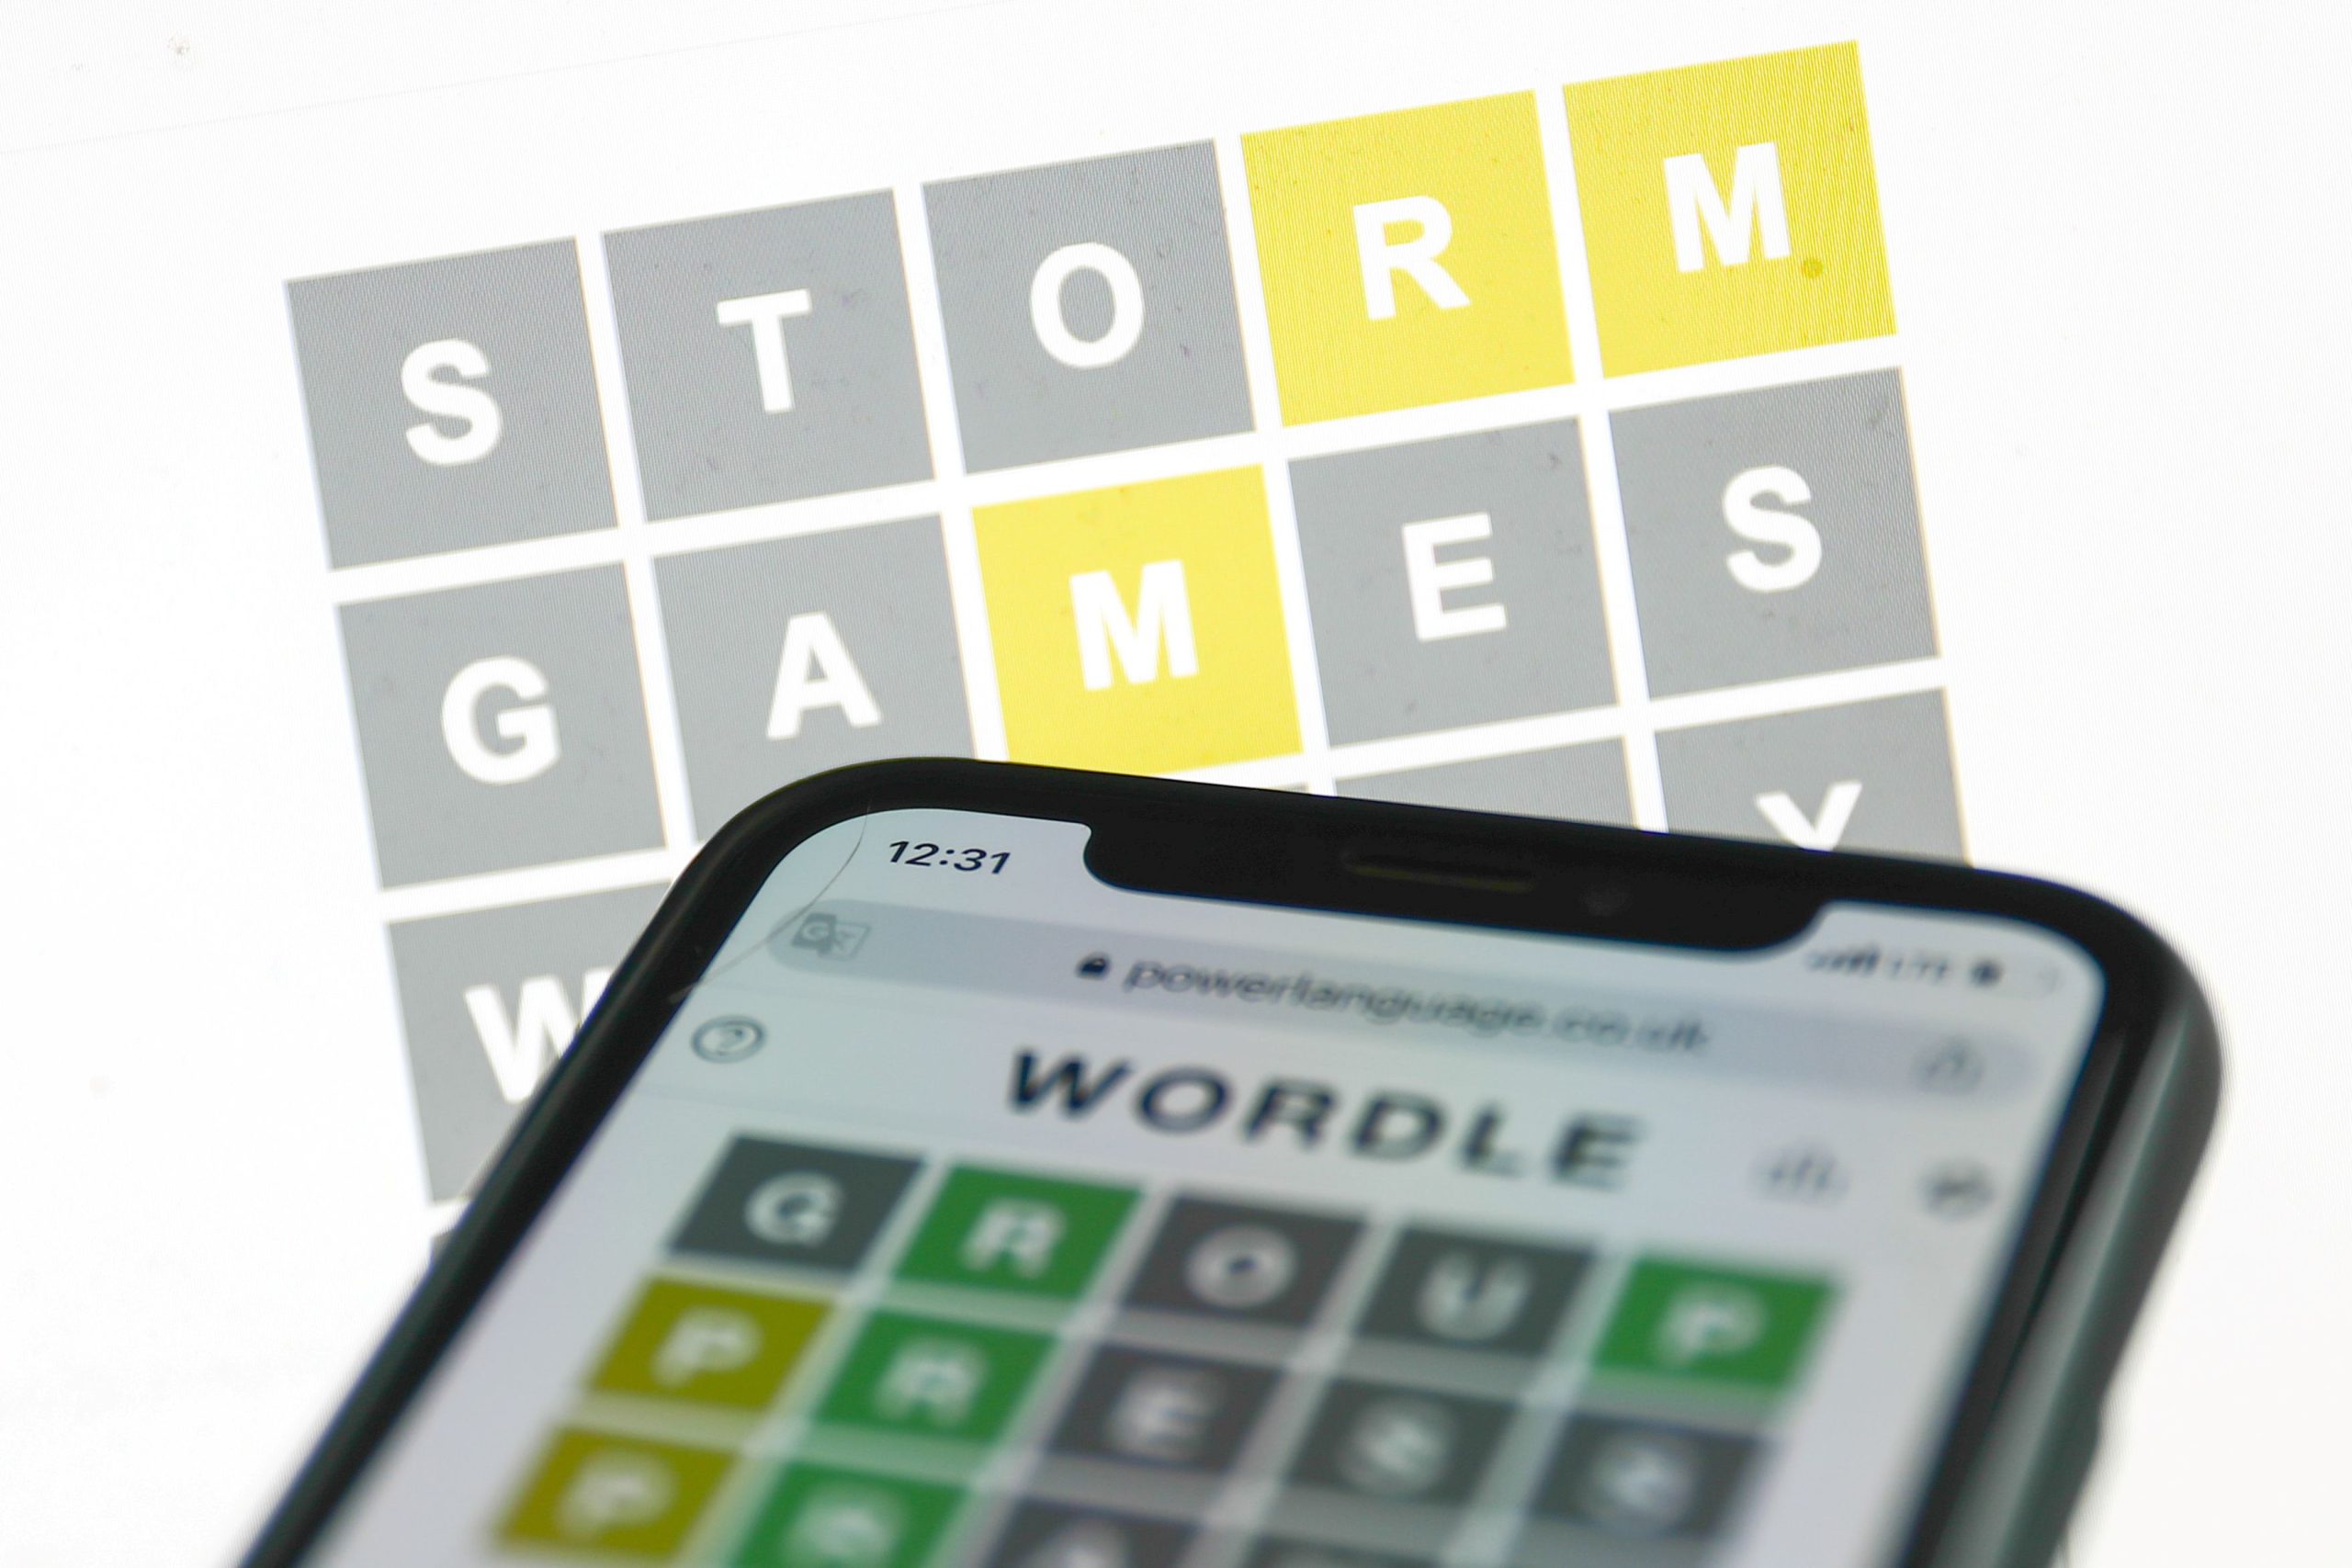 How to Play Wordle Game